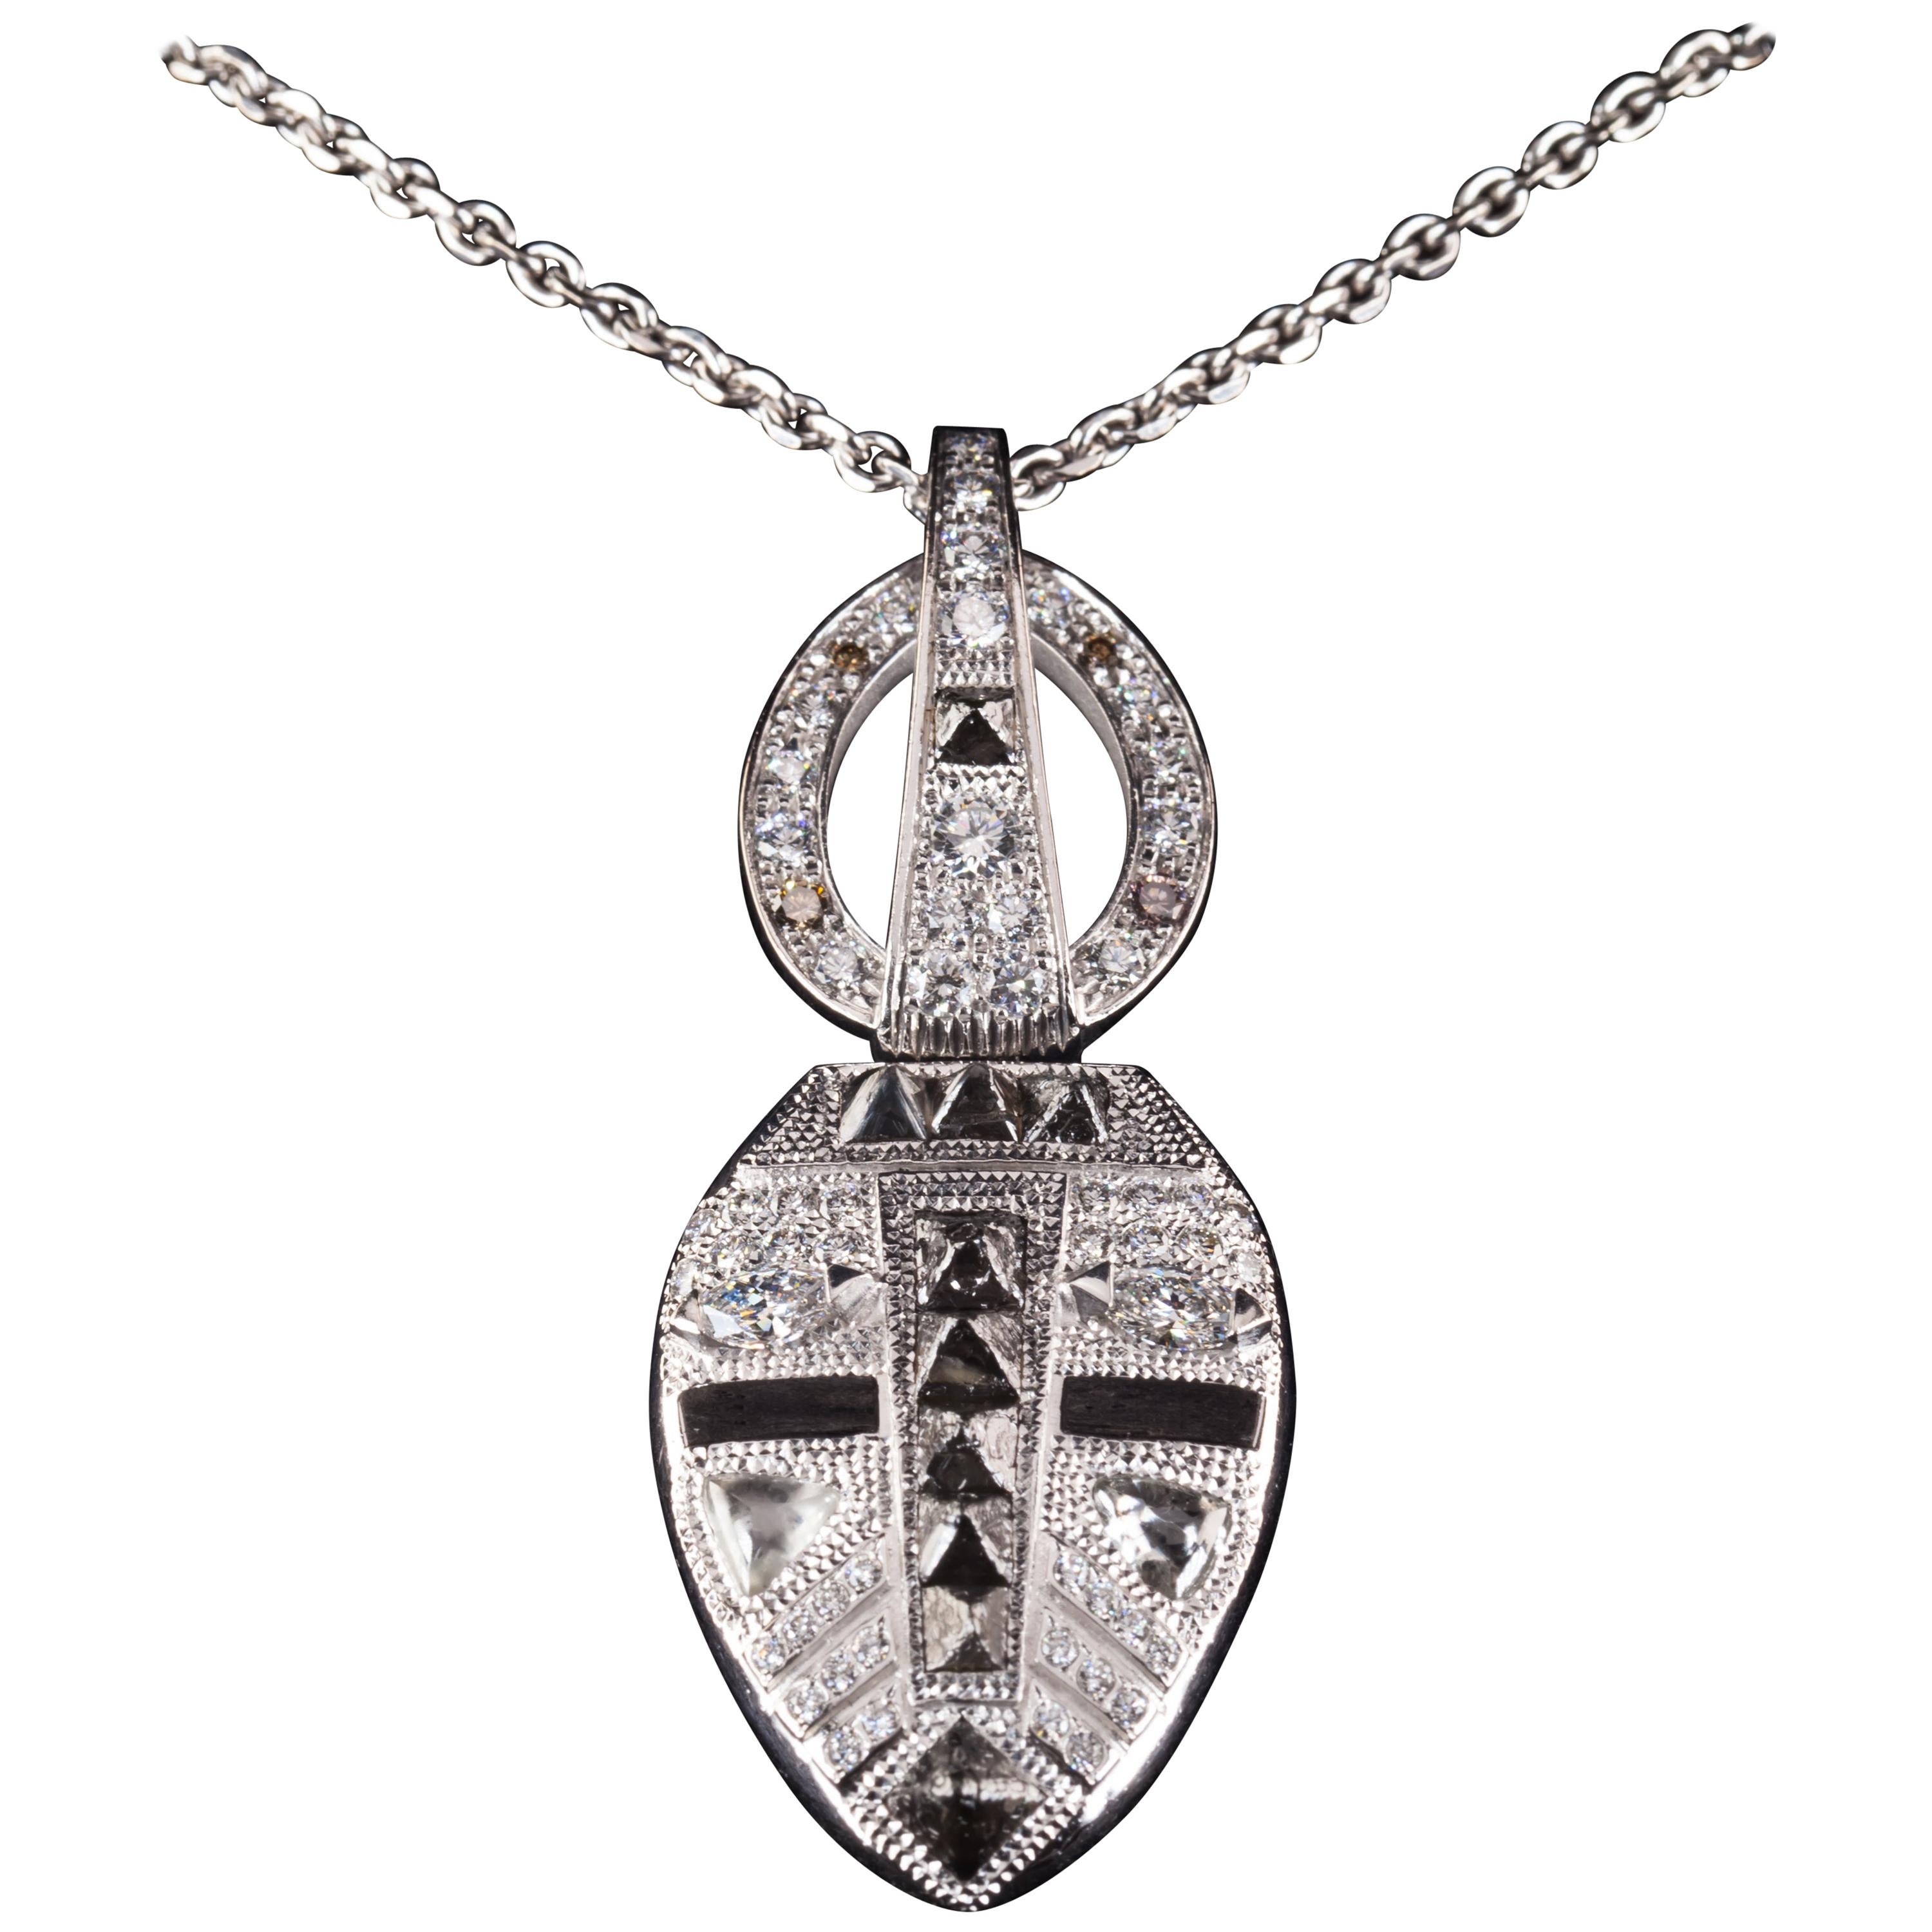 De Beers Rough Diamond Yayadhama Amulet Pendant from Talisman Collection